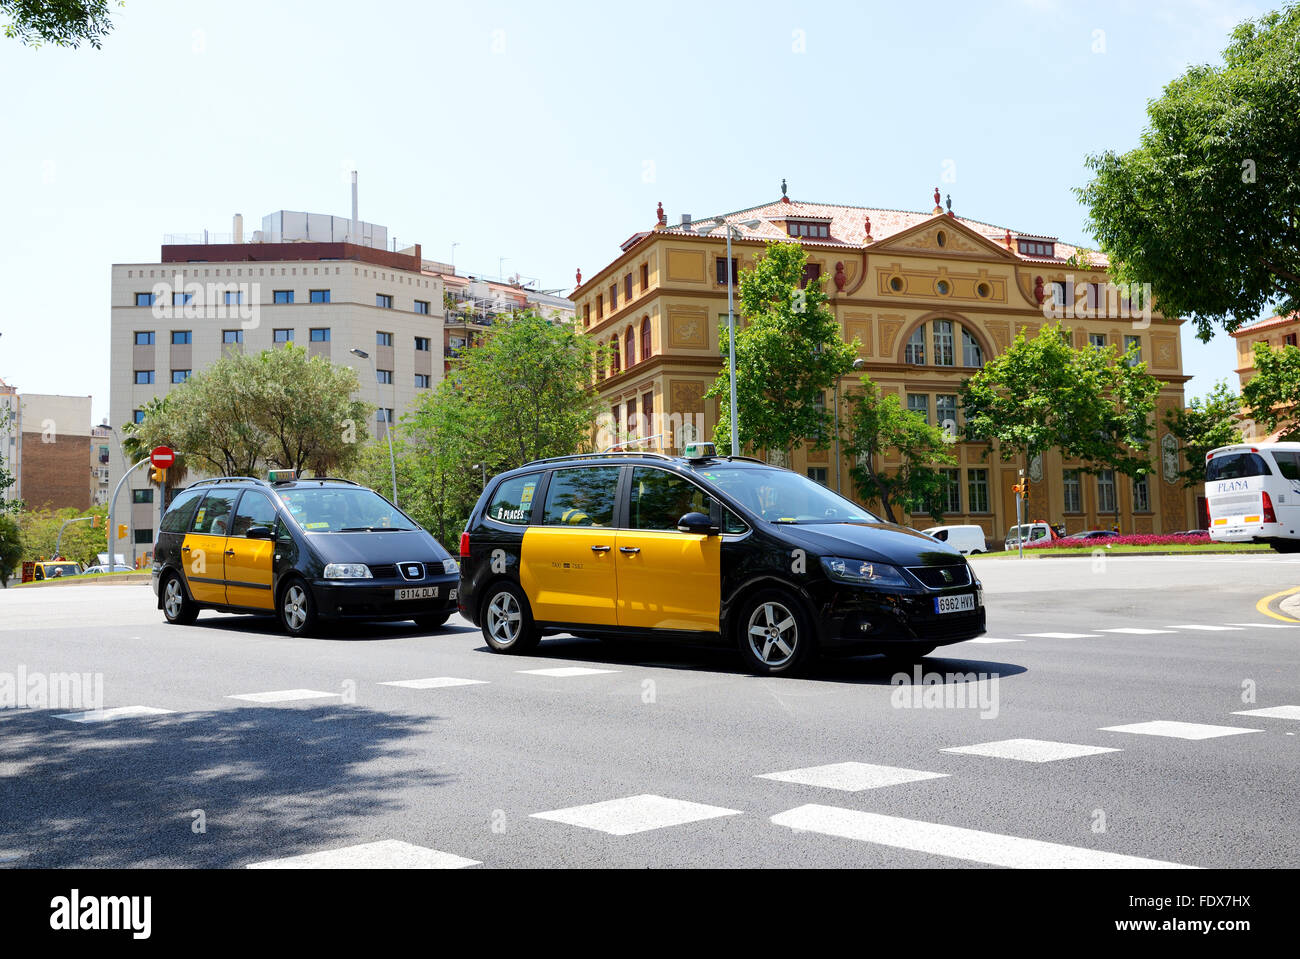 The taxi cars and tourists enjoiying their vacation, Barcelona, Spain Stock Photo